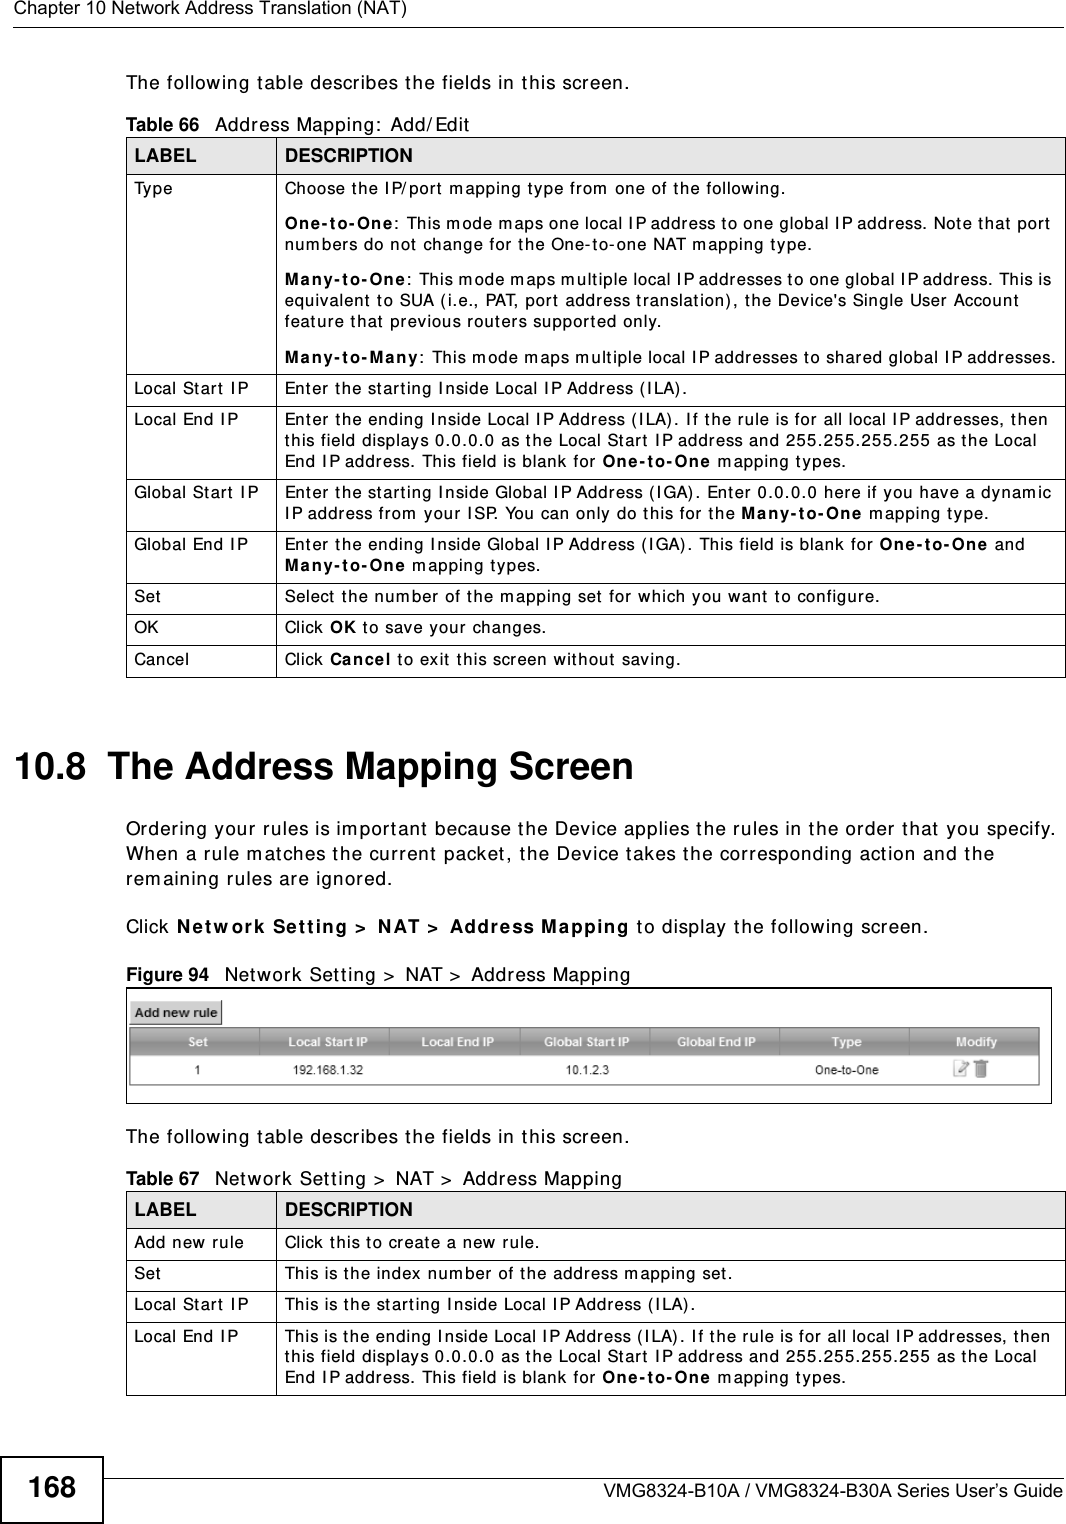 Chapter 10 Network Address Translation (NAT)VMG8324-B10A / VMG8324-B30A Series User’s Guide168The following t able describes t he fields in this screen.10.8  The Address Mapping ScreenOrdering your rules is im port ant  because t he Device applies t he rules in t he order t hat  you specify. When a rule m atches the current  packet , the Device t akes t he corresponding act ion and the rem aining rules are ignored. Click N et w ork  Sett ing &gt;  N AT &gt;  Addr ess M a pping t o display t he following screen. Figure 94   Net work Set t ing &gt;  NAT &gt;  Address MappingThe following t able describes t he fields in this screen.Table 66   Address Mapping:  Add/ EditLABEL DESCRIPTIONType Choose t he I P/ port m apping type from  one of t he following.One - to- On e:  This m ode m aps one local I P address to one global I P address. Note t hat  port num bers do not  change for t he One- t o-one NAT m apping t ype.M a ny - t o- O ne :  This m ode m aps m ultiple local I P addresses t o one global I P addr ess. This is equivalent  t o SUA (i.e., PAT, port  address t ranslat ion) , t he Device&apos;s Single User Account feat ure t hat  prev ious routers support ed only. M a ny - t o- M a n y:  This m ode m aps m ult iple local I P addresses t o shared global I P addresses.Local Start  I P Enter t he st arting I nside Local I P Addr ess (I LA) .Local End I P Enter the ending I nside Local I P Address (I LA) . I f the rule is for all local I P addresses, t hen this field displays 0.0.0.0 as t he Local Start  I P address and 255.255.255.255 as t he Local End I P addr ess. This field is blank for  On e - t o - On e m apping t ypes.Global St art  I P Enter t he st ar ting I nside Global I P Address ( I GA) . Ent er 0.0.0.0 here if you have a dynam ic I P addr ess from  your I SP. You can only do this for the M an y- t o- On e m apping type. Global End I P Ent er the ending I nside Global I P Address ( I GA) . This field is blank for One - t o- On e and Many- t o- One  m apping t ypes.Set Select the num ber of the m apping set  for which you want  t o configur e.OK Click OK t o save your changes.Cancel Click Ca ncel t o exit  t his screen wit hout  saving.Table 67   Net wor k Sett ing &gt;  NAT &gt;  Address MappingLABEL DESCRIPTIONAdd new rule Click this t o creat e a new rule.Set This is the index num ber of t he address m apping set .Local Start  I P This is t he st art ing I nside Local I P Address ( I LA) .Local End I P This is t he ending I nside Local I P Address ( I LA) . I f t he rule is for  all local I P addr esses, t hen this field displays 0.0.0.0 as t he Local Start  I P address and 255.255.255.255 as t he Local End I P addr ess. This field is blank for  On e - t o - On e m apping t ypes.